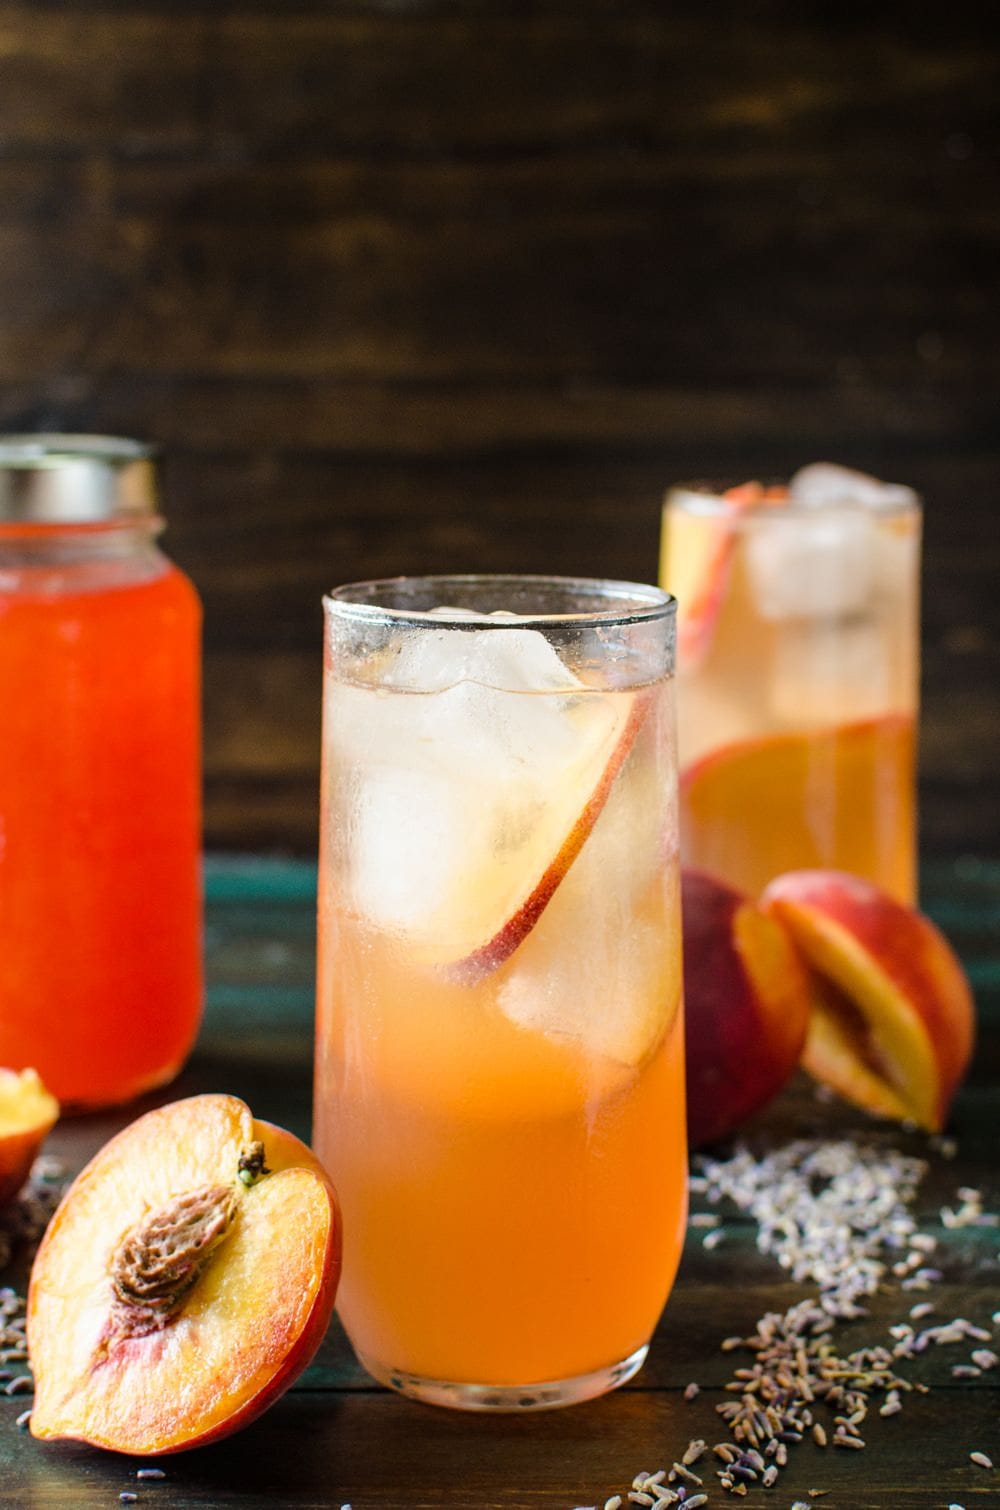 Lavender Peach Shrub Syrup - This sweet, fruity, tangy, floral Lavender Peach Shrub Syrup is simple to make and is a great way to use up bruised, overripe peaches. Mix with ice cold water for a refreshing, non-alcoholic summer drink, or with some vodka or tequila for a delicious cocktail, or with some champagne for a wonderful mimosa!